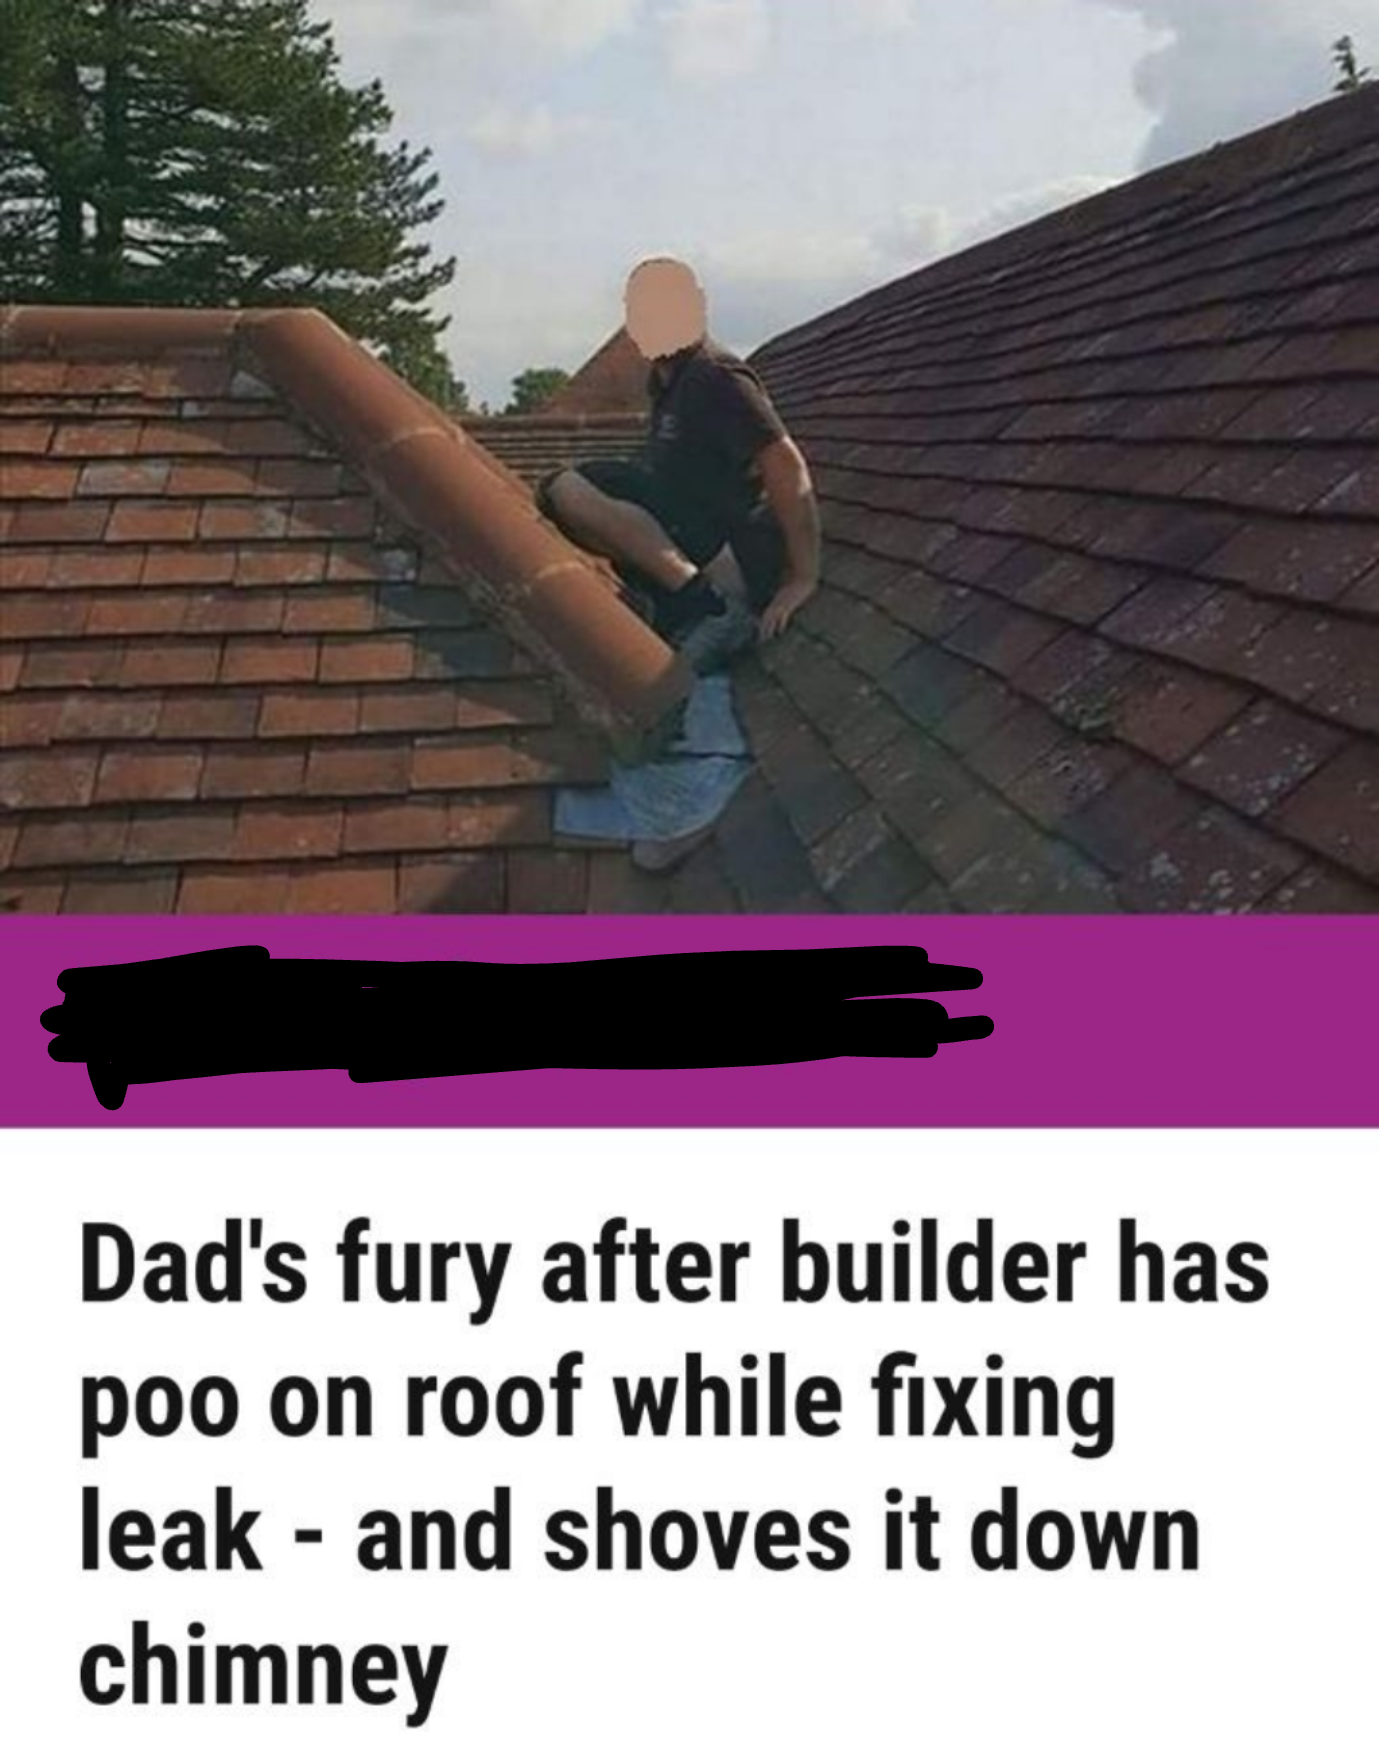 roof - Dad's fury after builder has poo on roof while fixing leak and shoves it down chimney